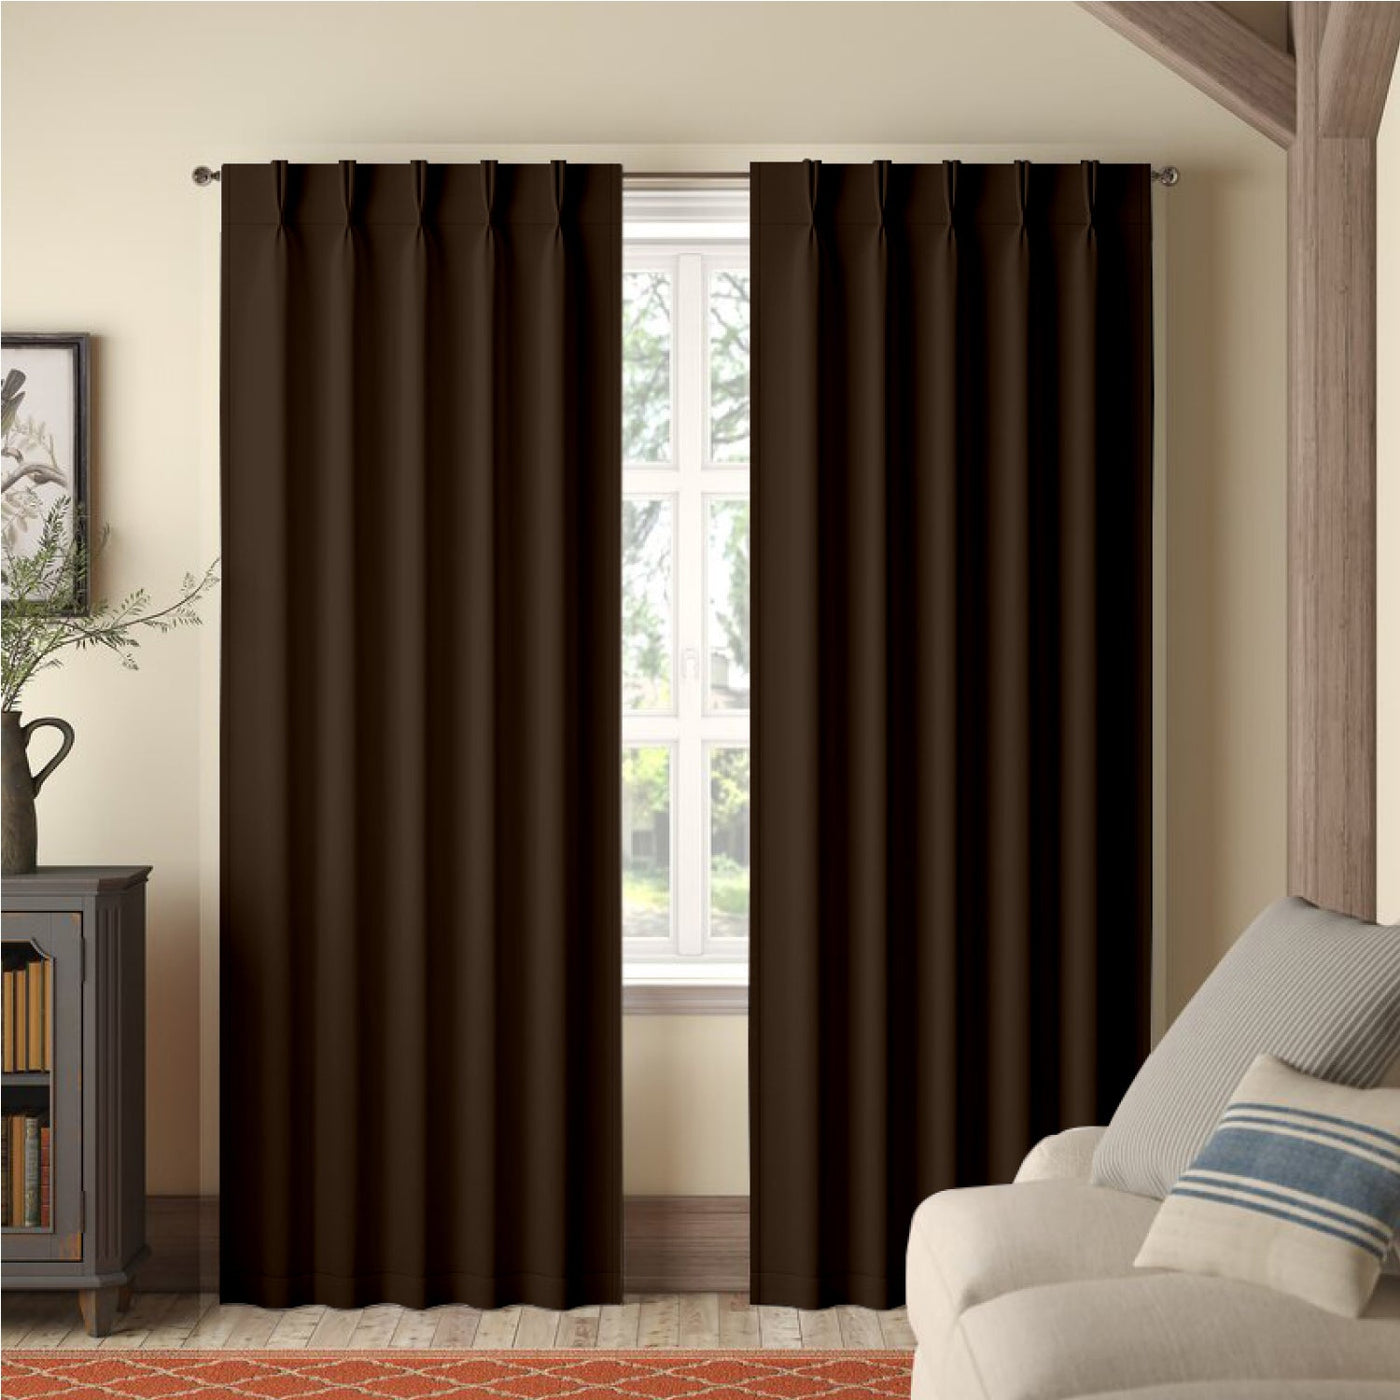 Double Pinch Pleat Semi-Blackout Curtain 1 Piece - Cocoa Brown